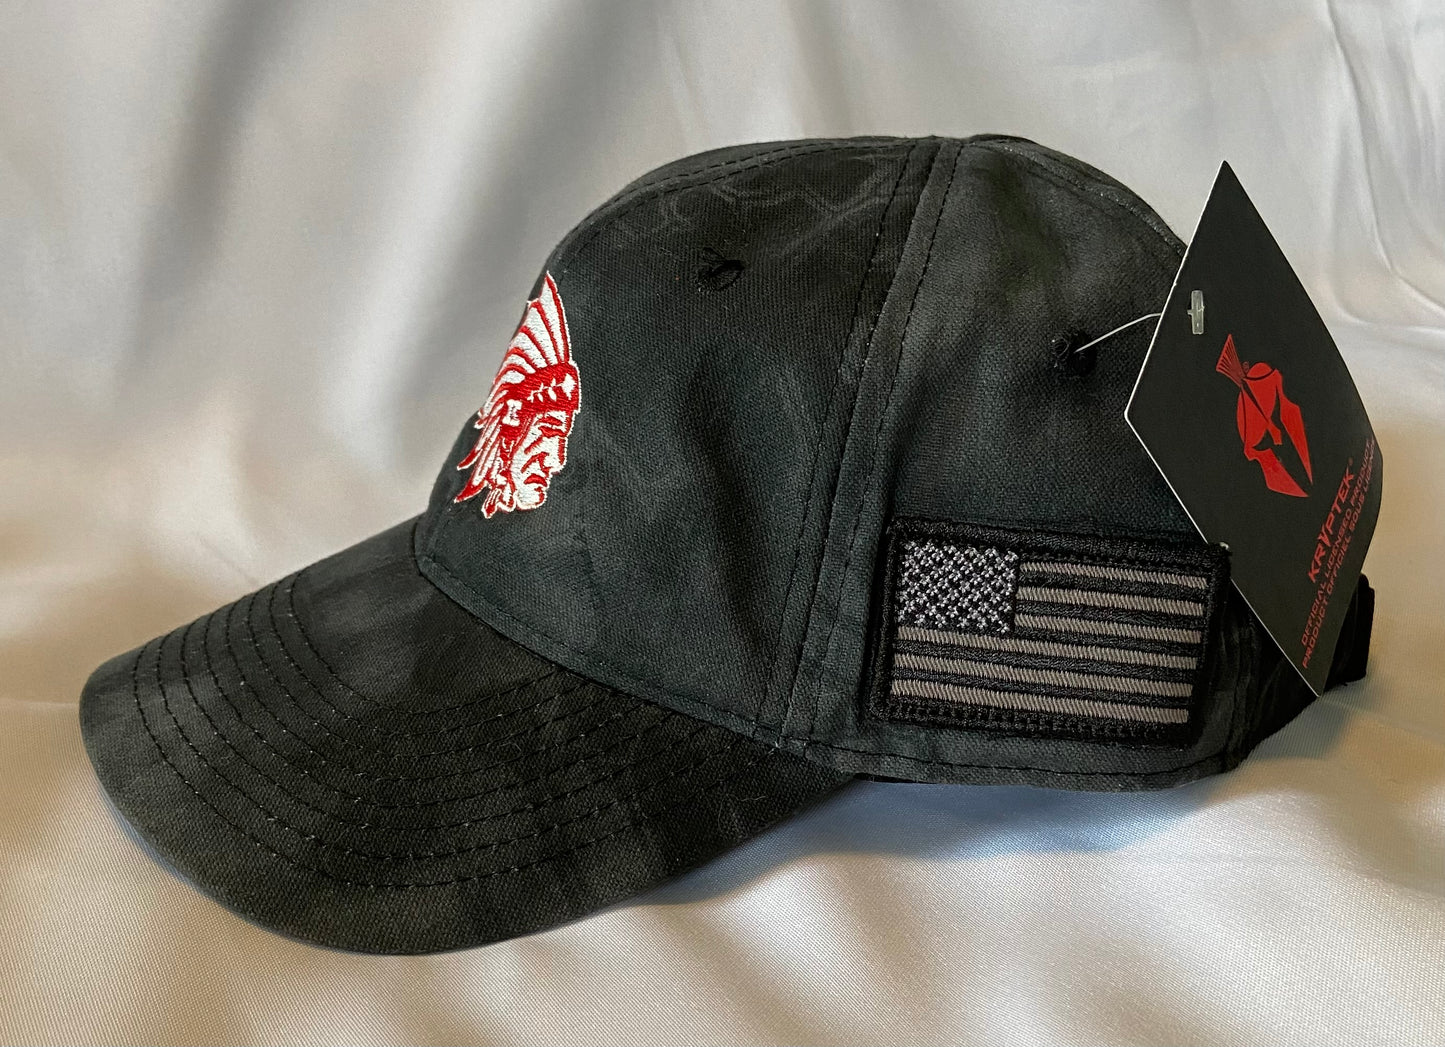 Knox Redskins Embroidered Hat - Black Camo with American Flag - Adjustable